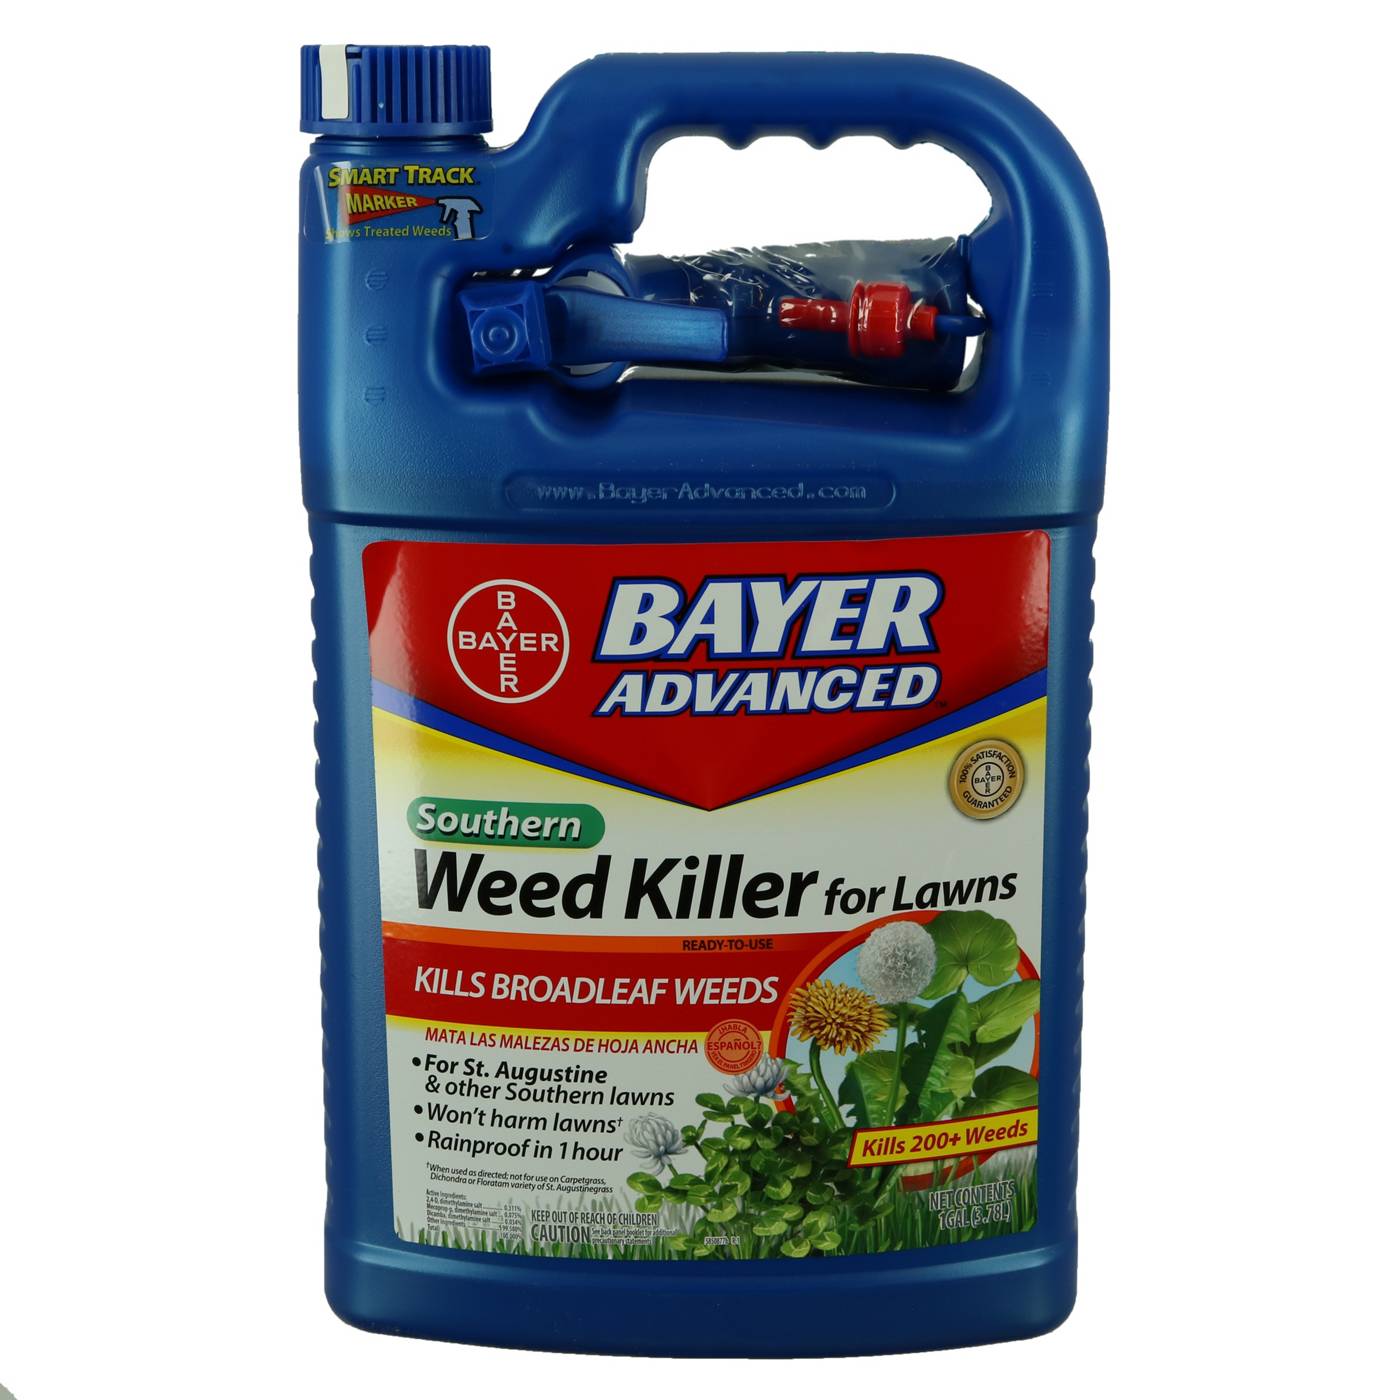 Bayer Southern Weed Killer For Lawns; image 1 of 2